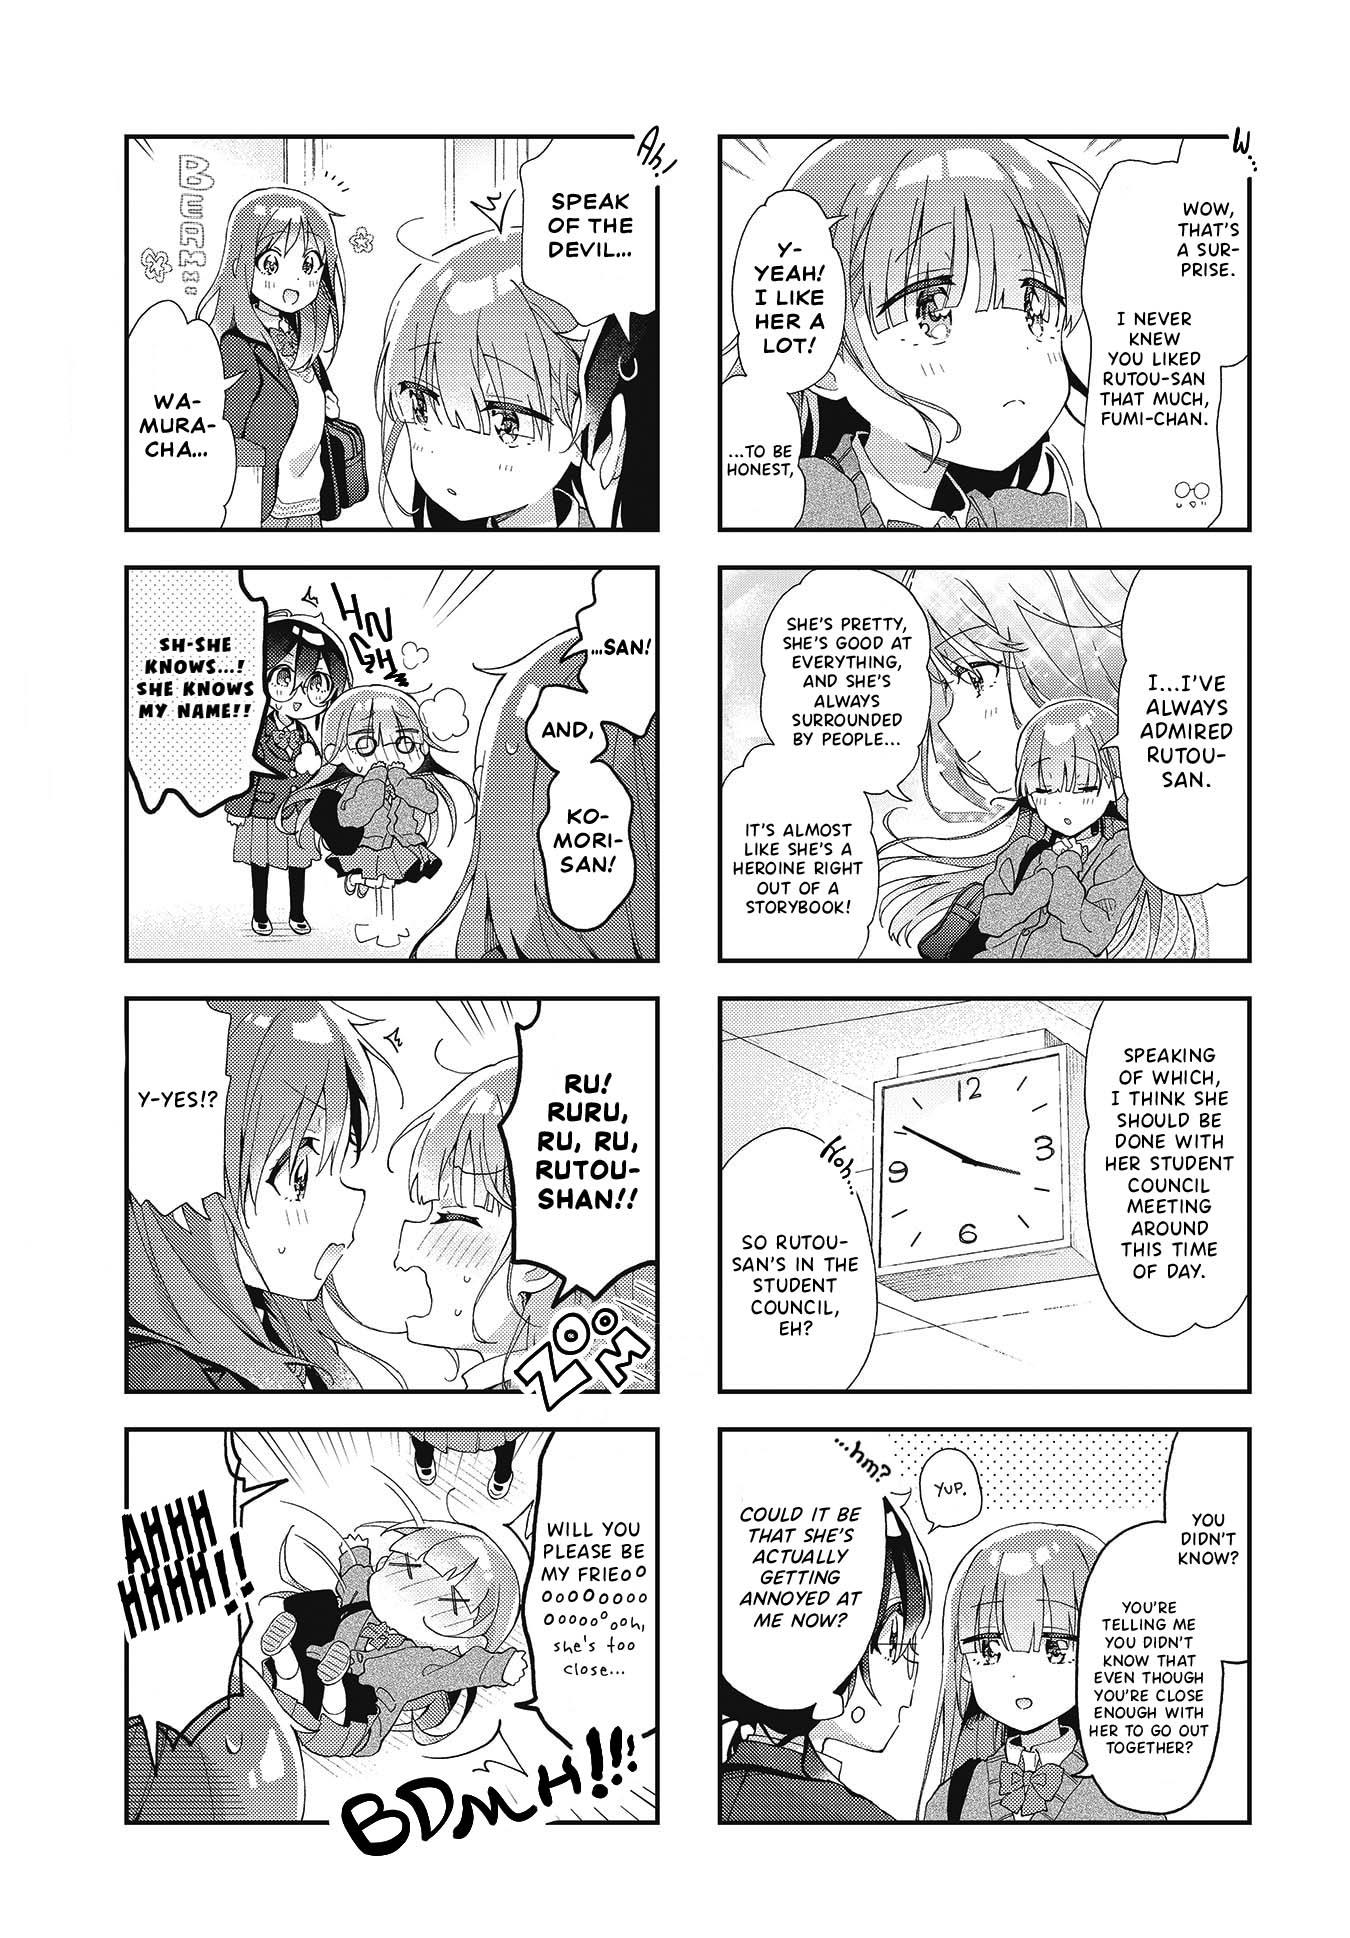 Rutou-San Ni Wa Kanaimasen! Vol.1 Chapter 5: Let's Let Our Fists Do The Talking - Picture 3